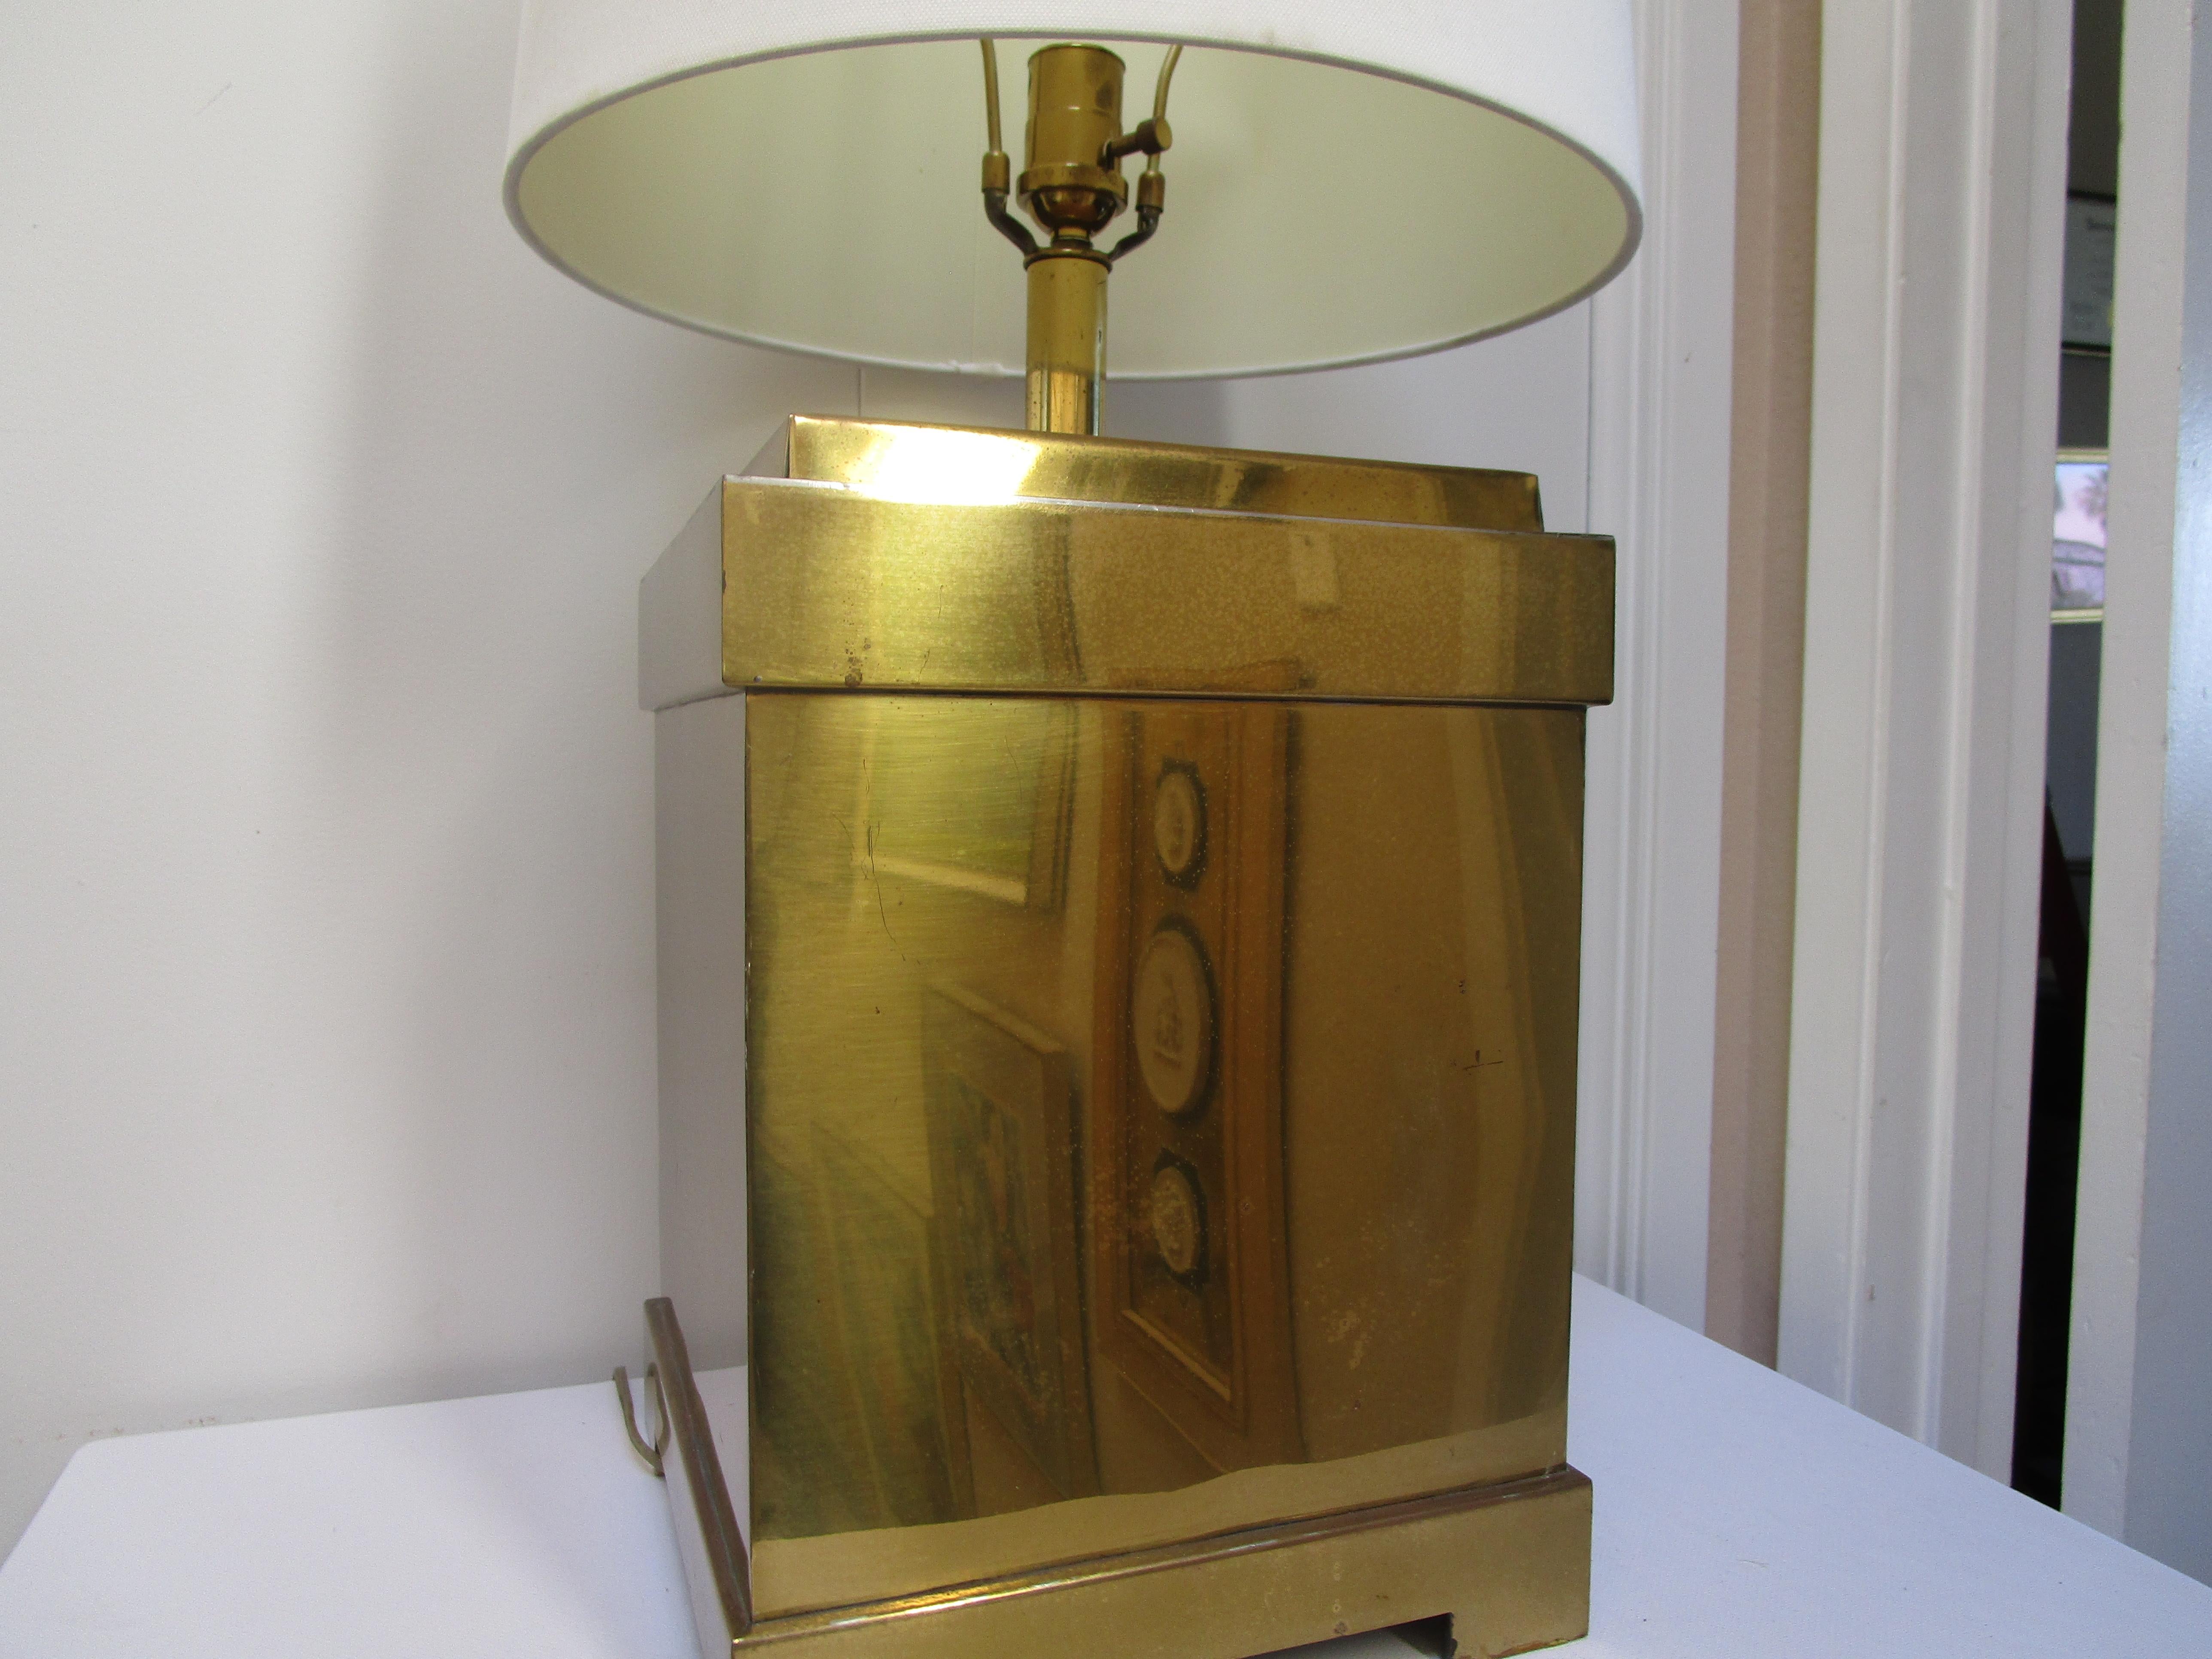 Polished Vintage Bright Brass Cube Remington Table Lamp from Hong Kong For Sale